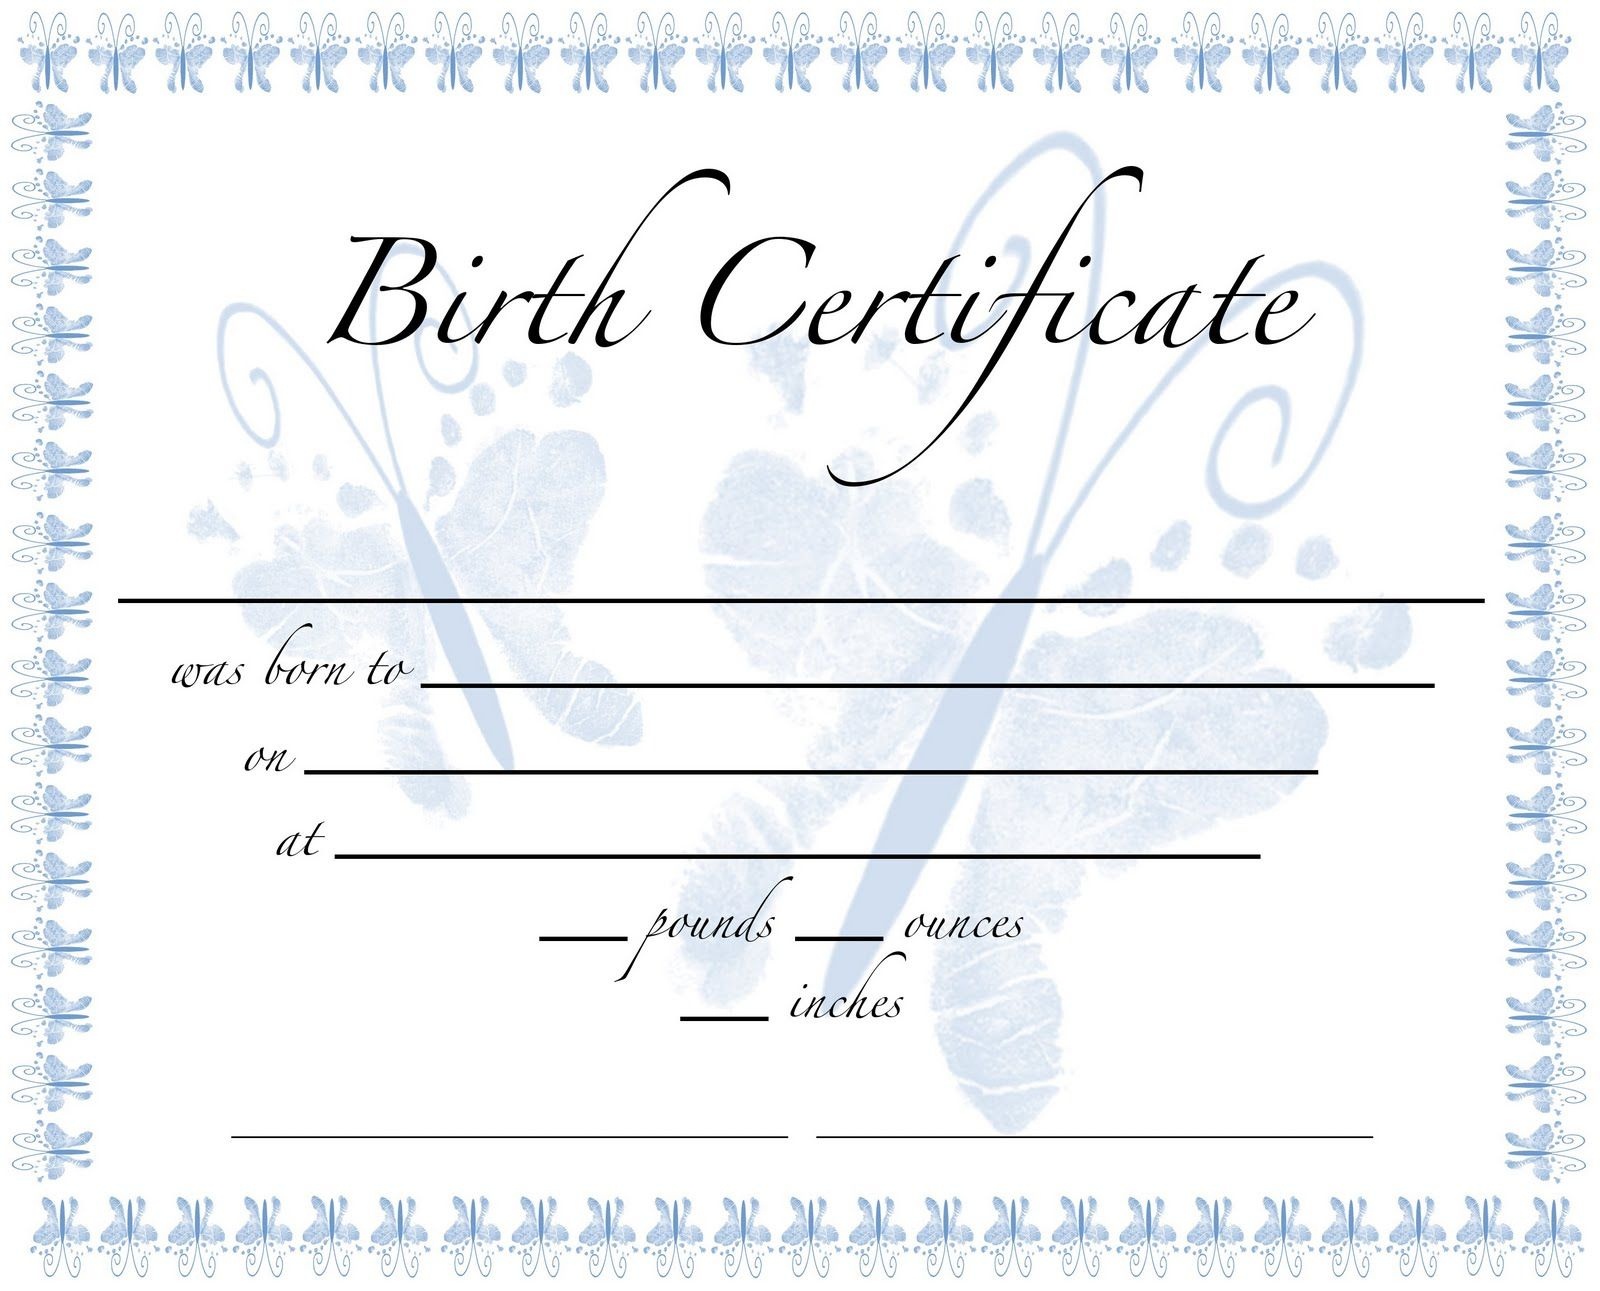 Pics For Birth Certificate Template For School Project Kgzrtlmd - Free Printable Birth Certificates For Puppies